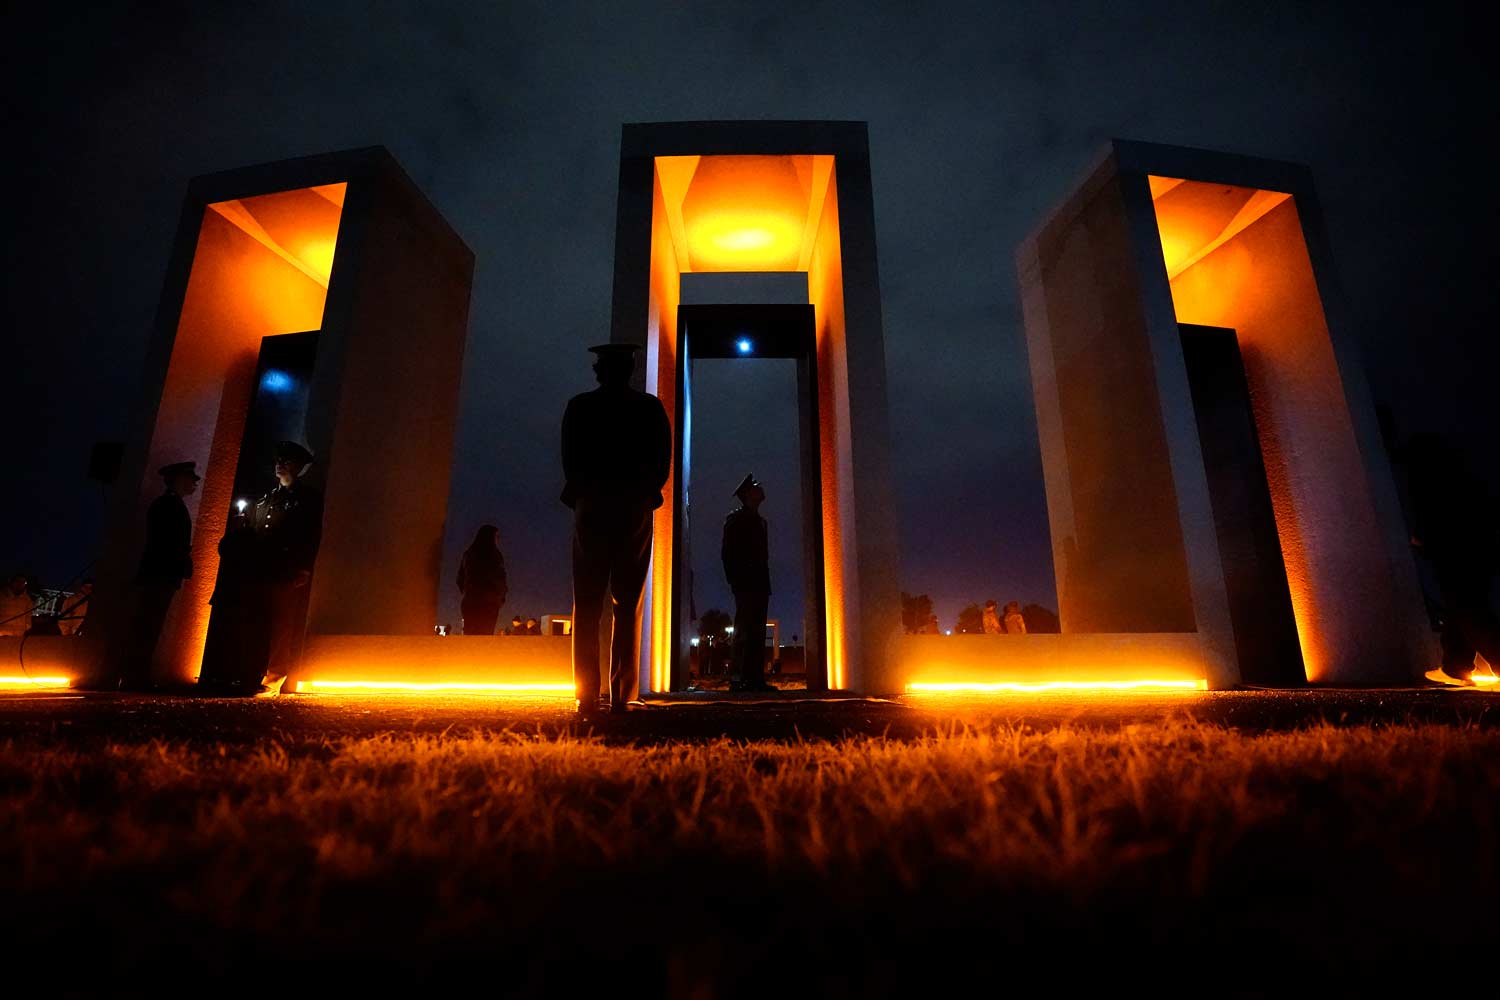 One of the bonfire memorial pillars lit up on the night of remembrance